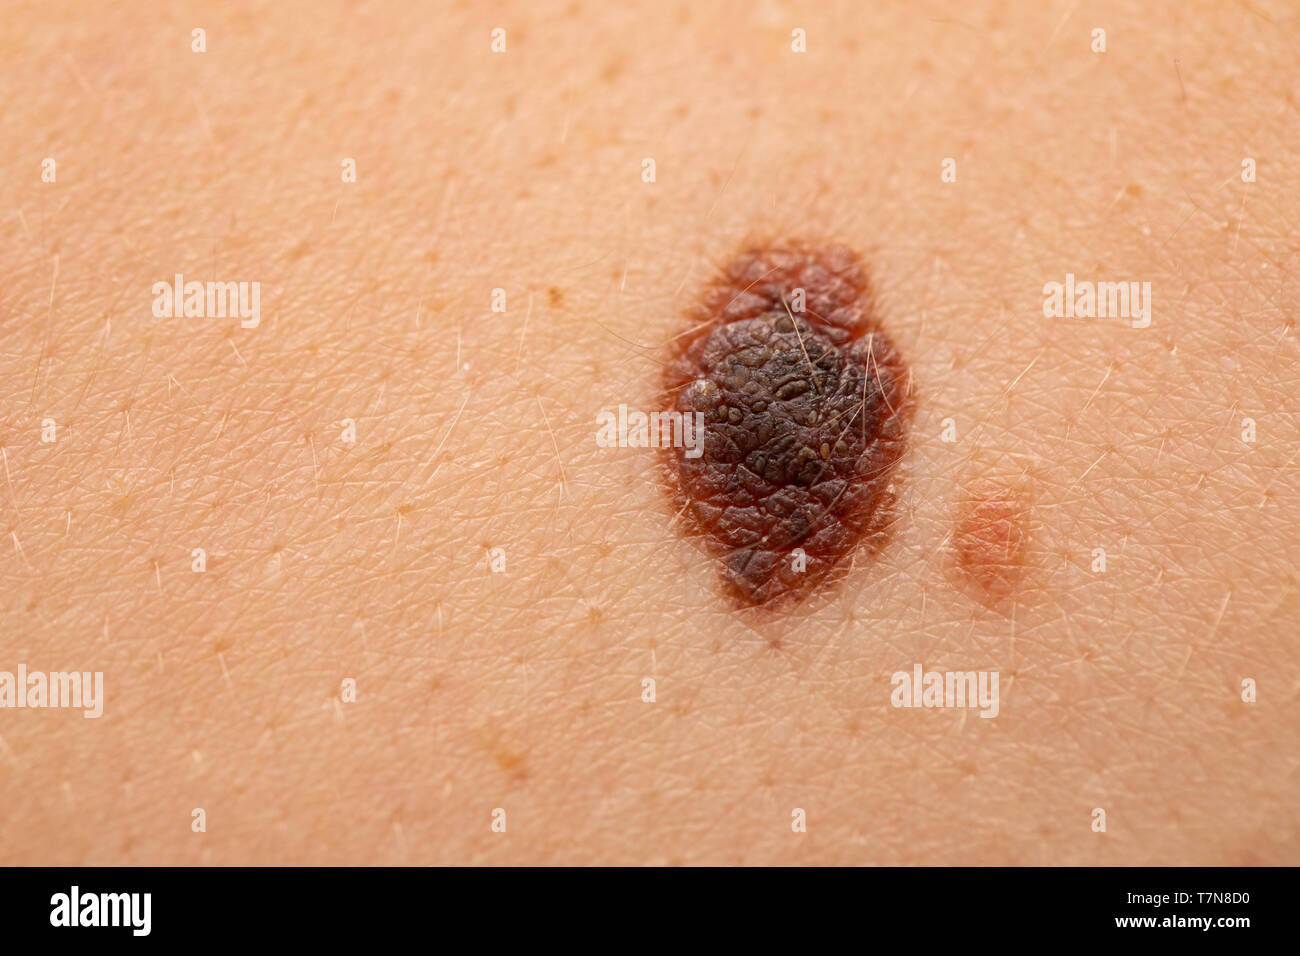 Close up picture of dangerous brown nevus on human skin - melanoma Stock Photo